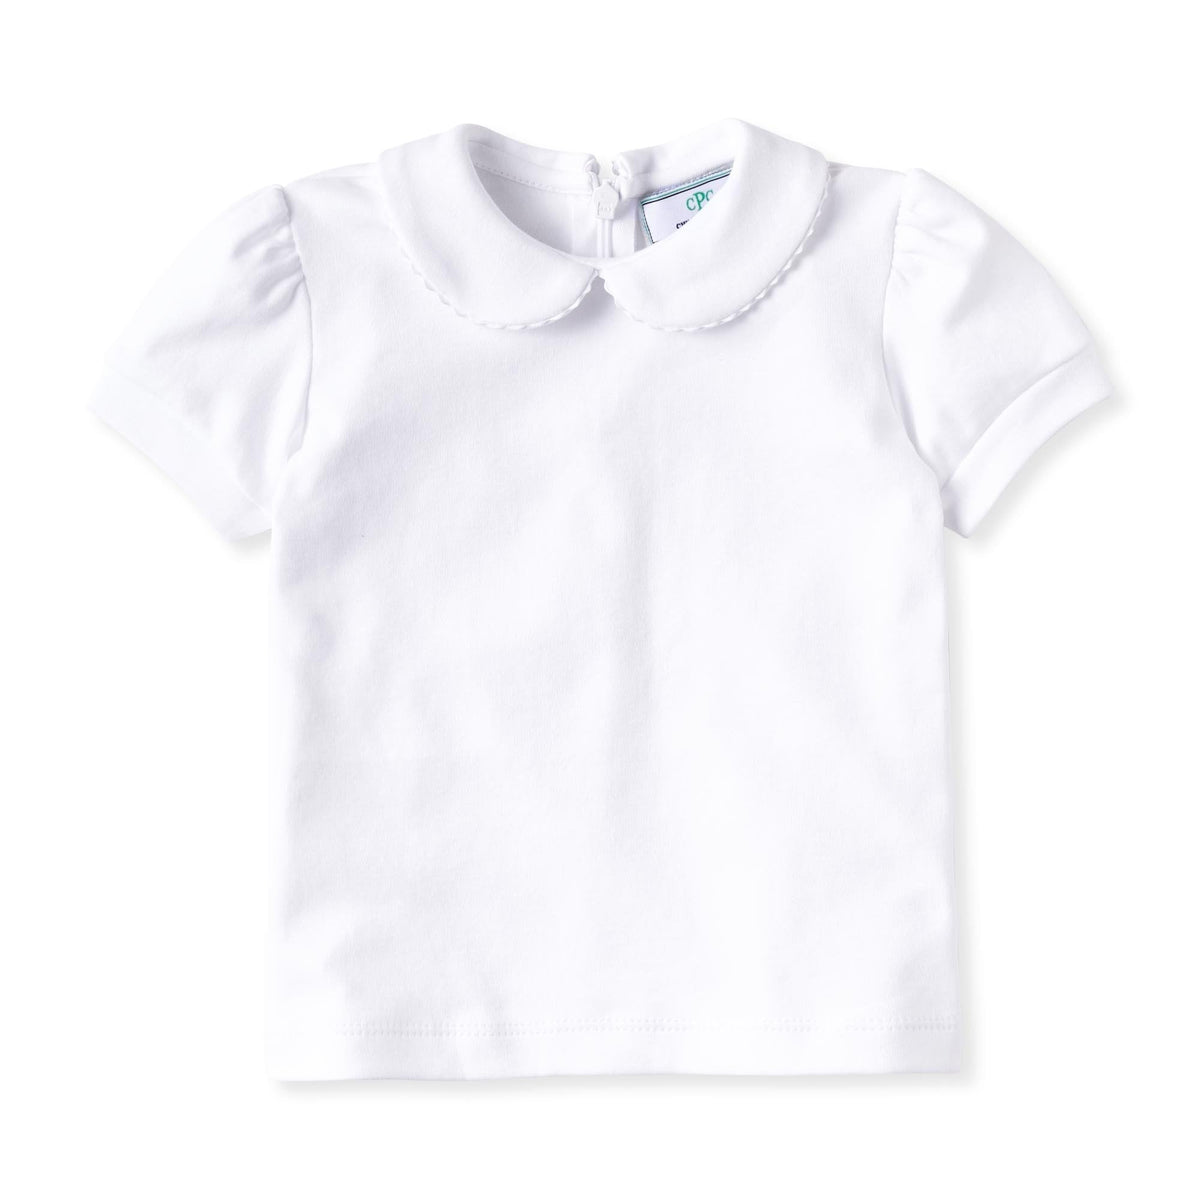 Classic and Preppy Isabelle Short Sleeve Peter Pan Shirt, White Ric Rac-Shirts and Tops-Bright White with White Ric Rac-6-9M-CPC - Classic Prep Childrenswear